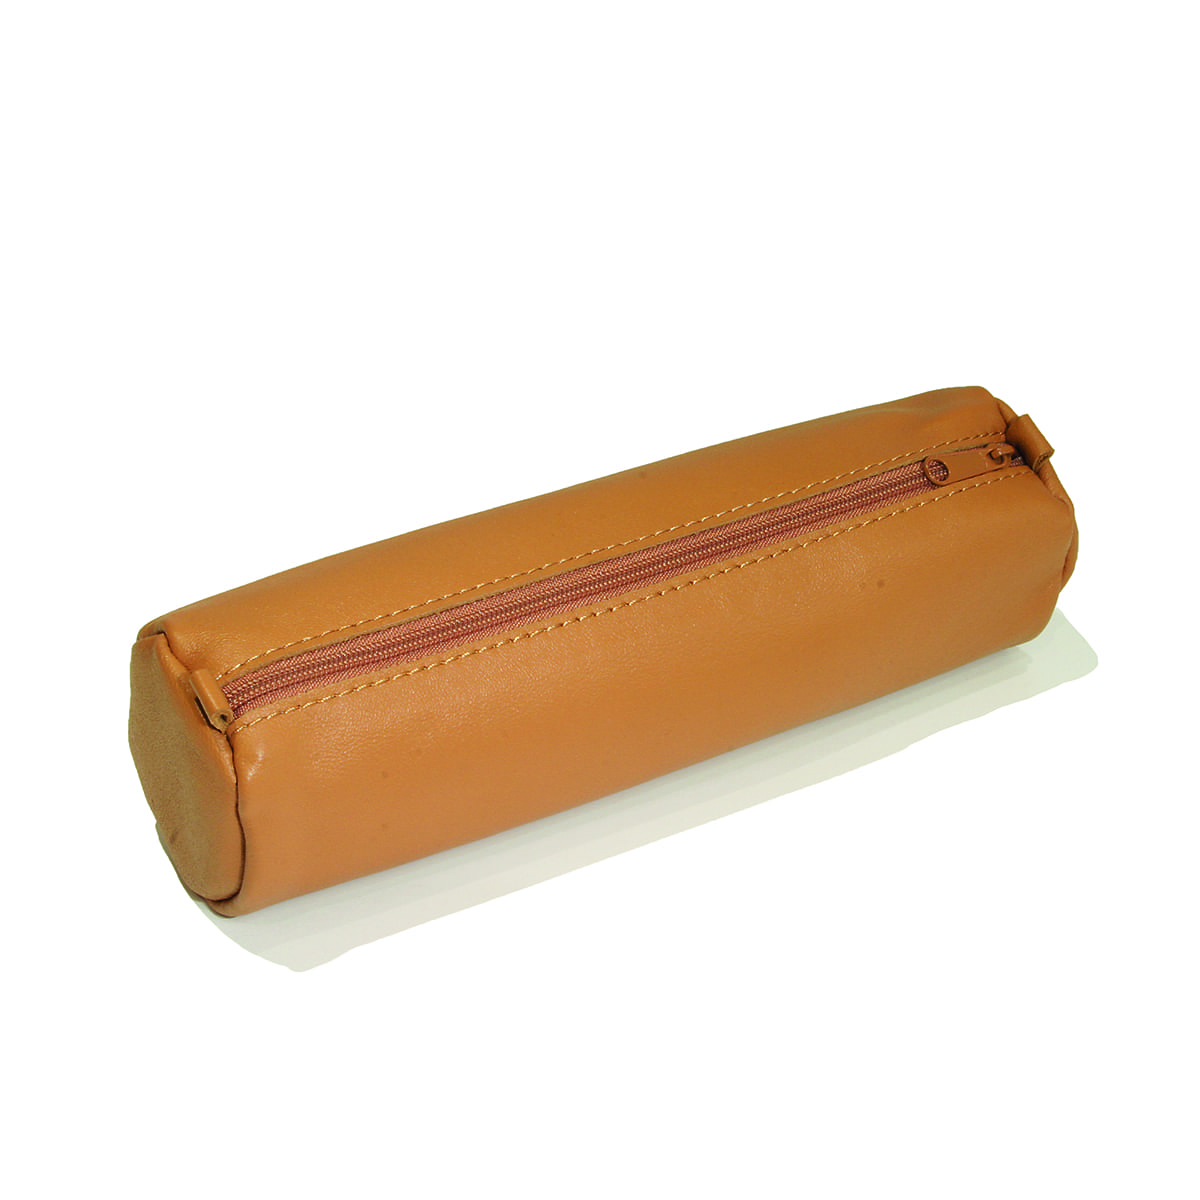 Age Bag Leather Pencil Cases | Green & Stone of Chelsea